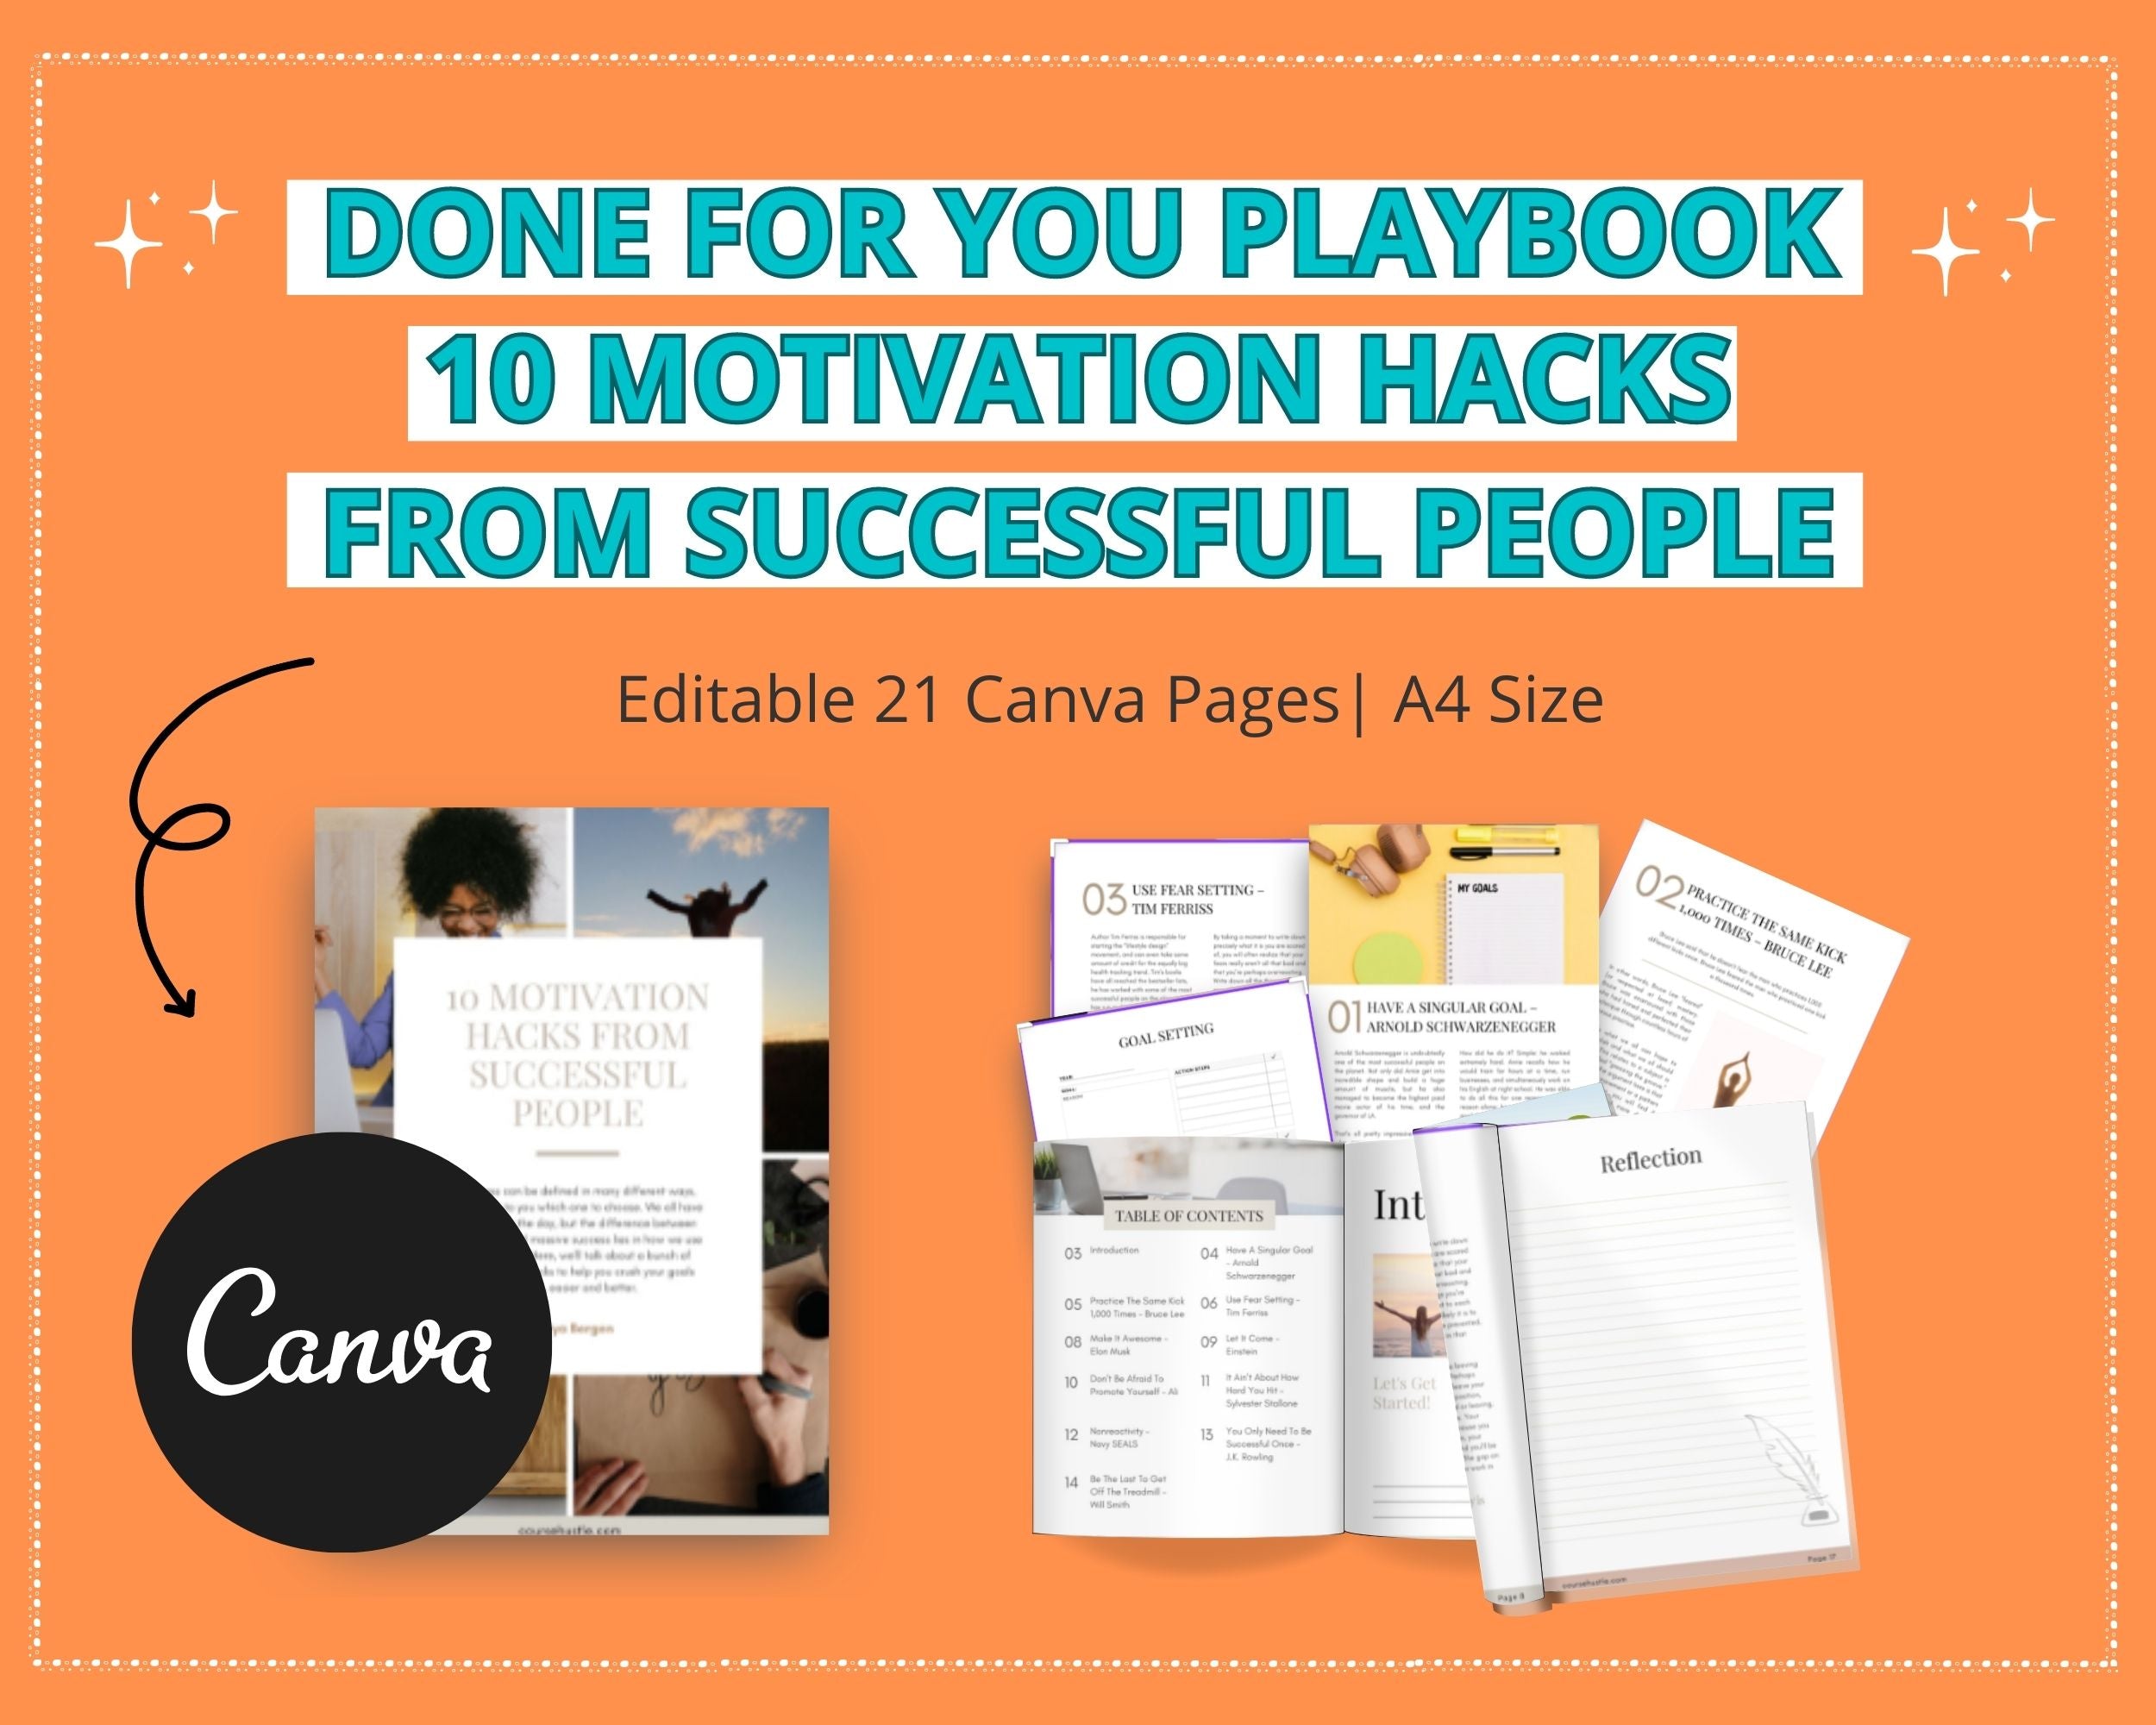 Done-for-You Motivation Hacks From Successful People Playbook in Canva | Editable A4 Size Canva Template